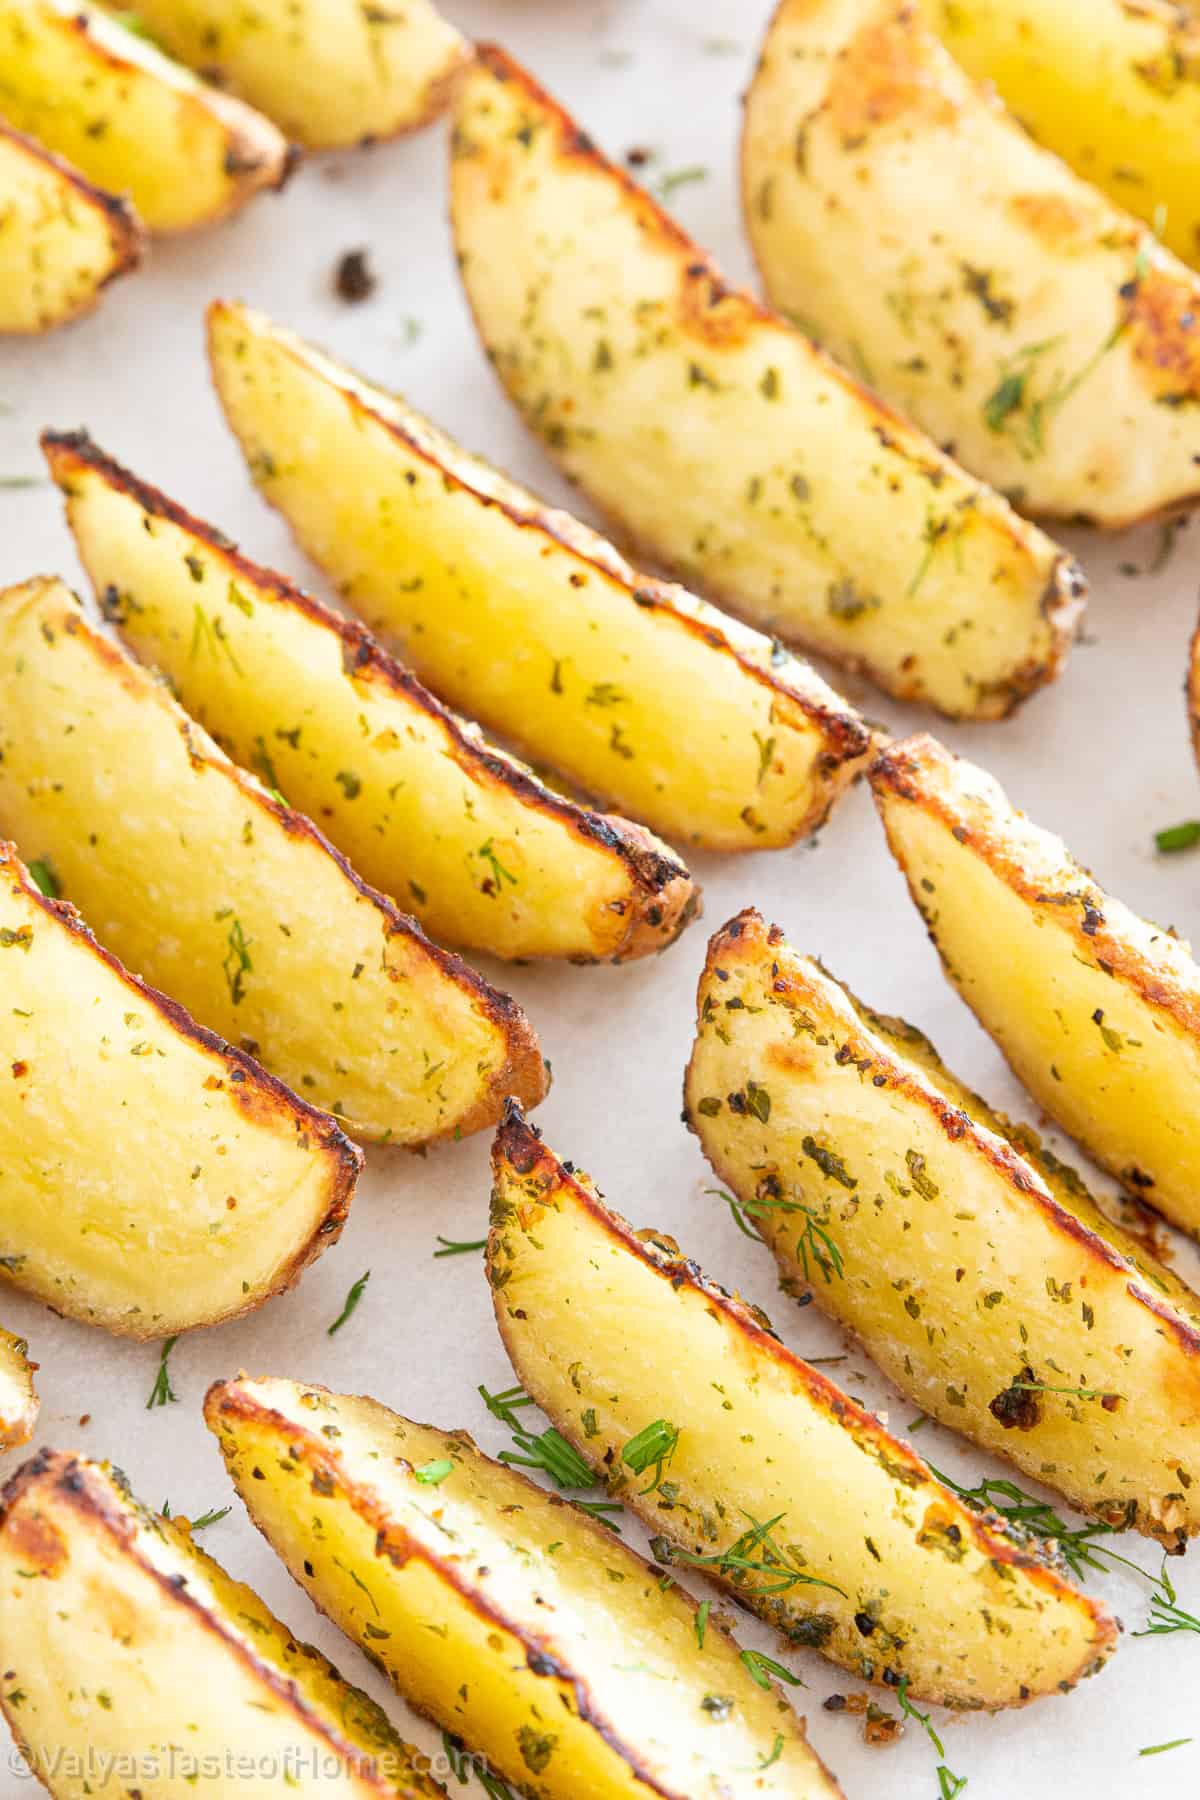 These Baked Potato Wedges are the perfect side dish by being crispy and crunchy on the outside, tender on the inside, and full of flavor in every bite!